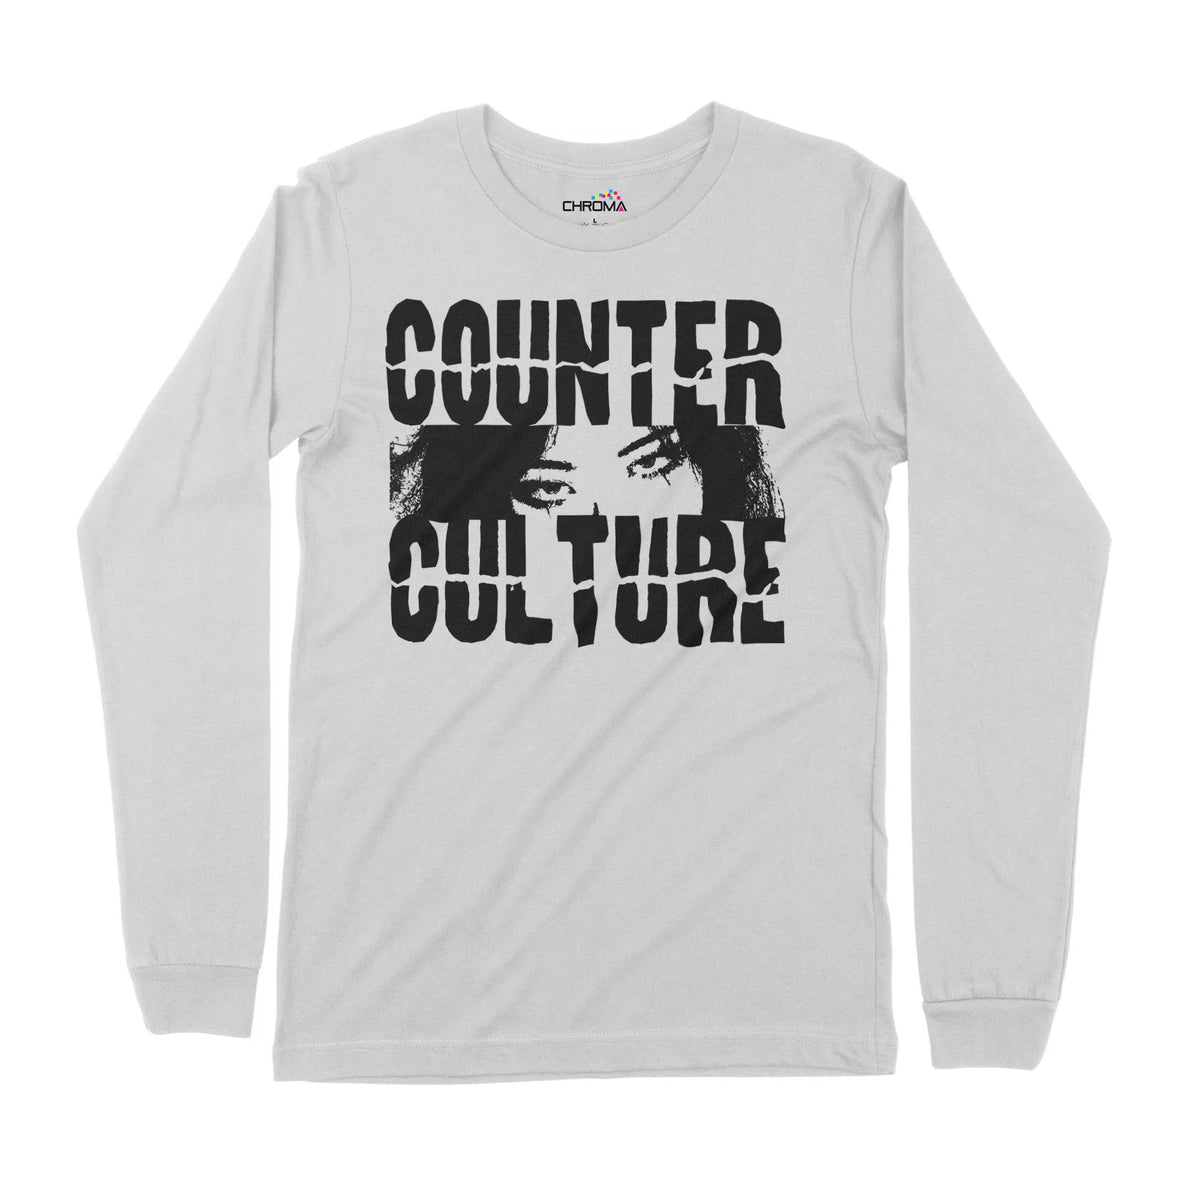 Counter Culture | Long-Sleeve T-Shirt | Premium Quality Streetwear Chroma Clothing